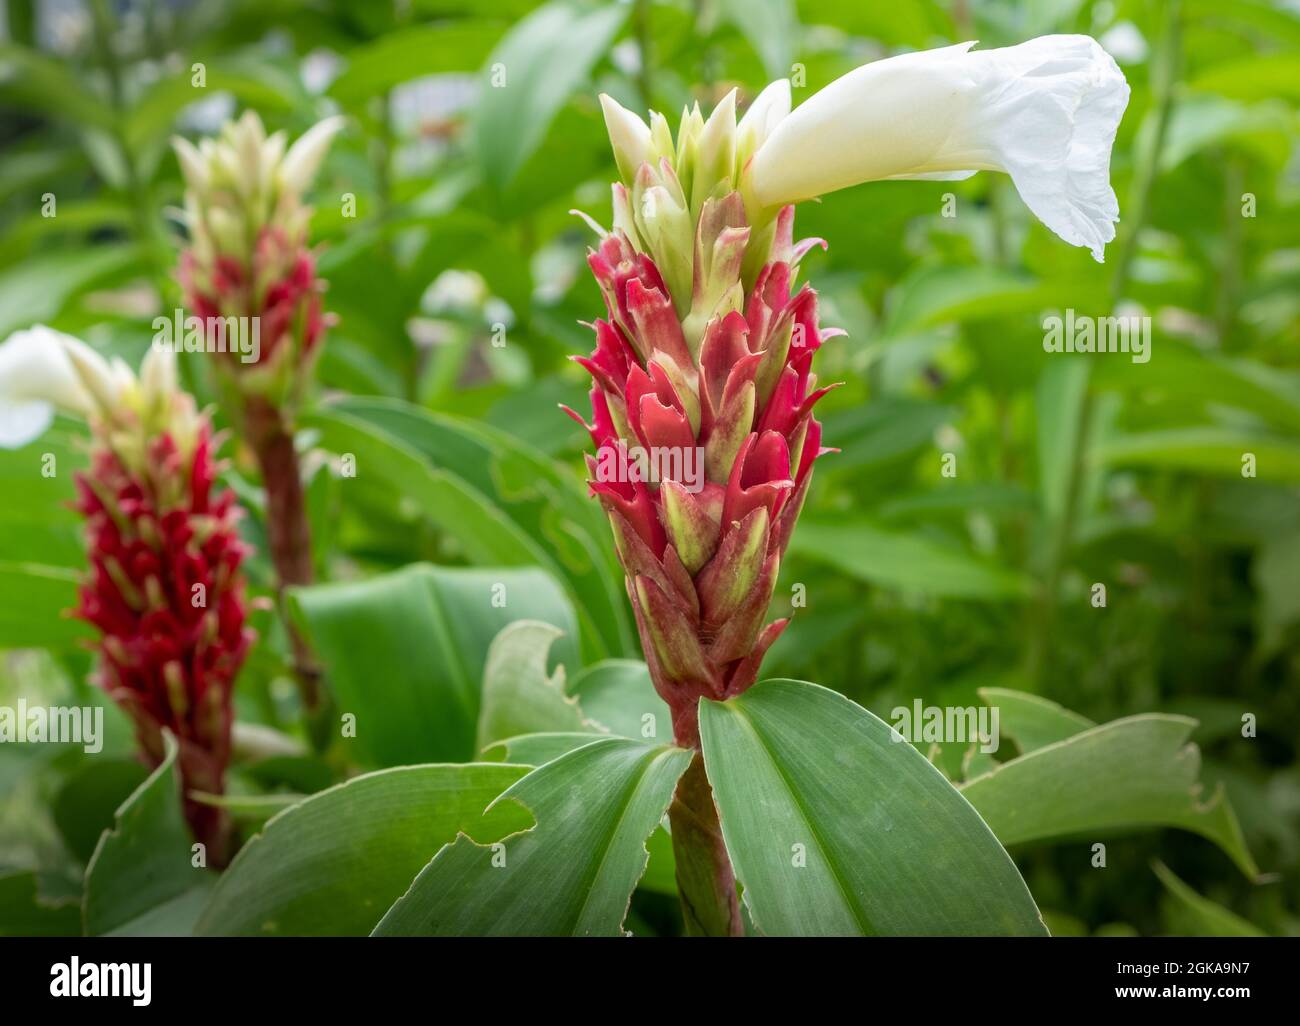 Crepe ginger blossom in a Thailand garden Stock Photo